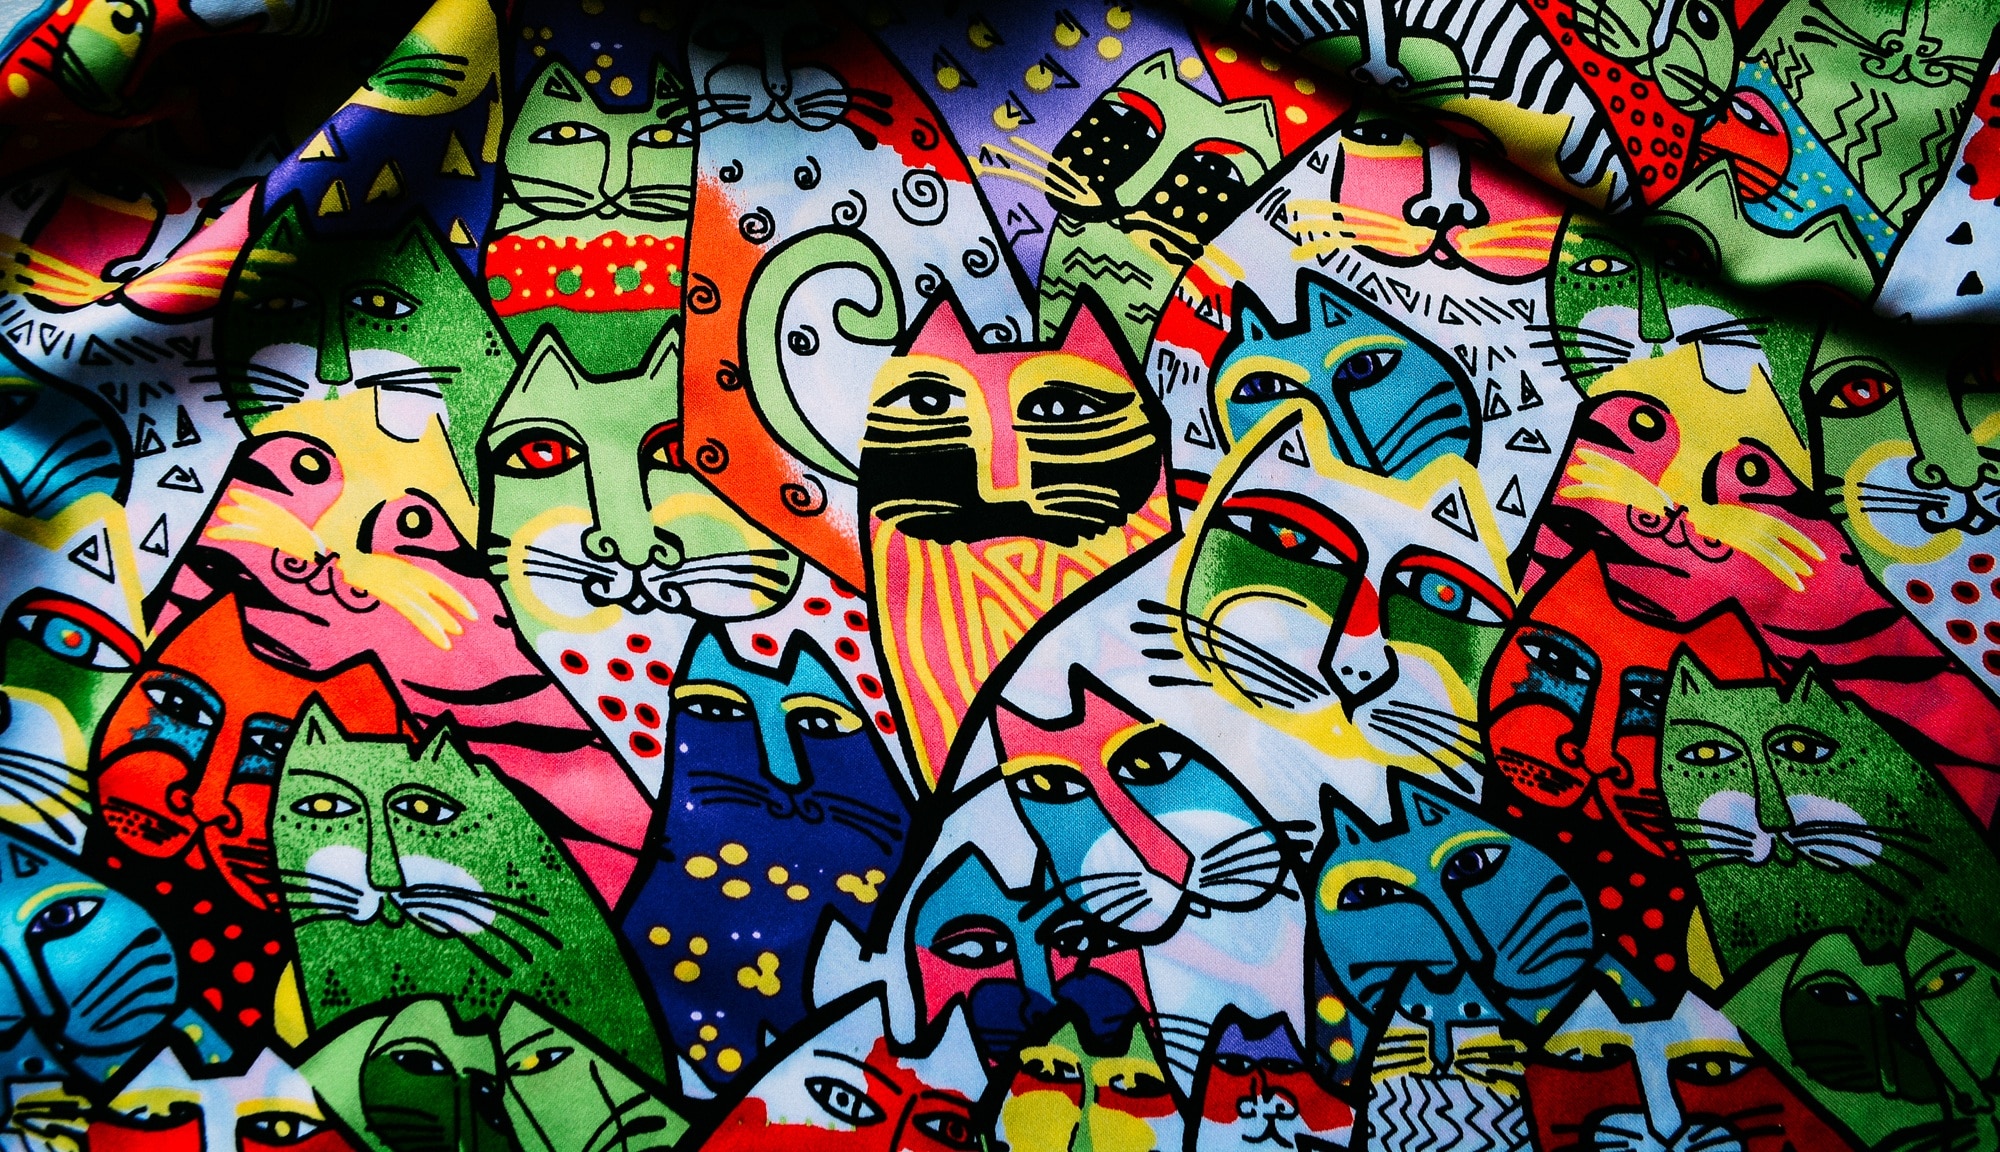 European Graffiti Capitals: The Best Places to See Street Art in Europe